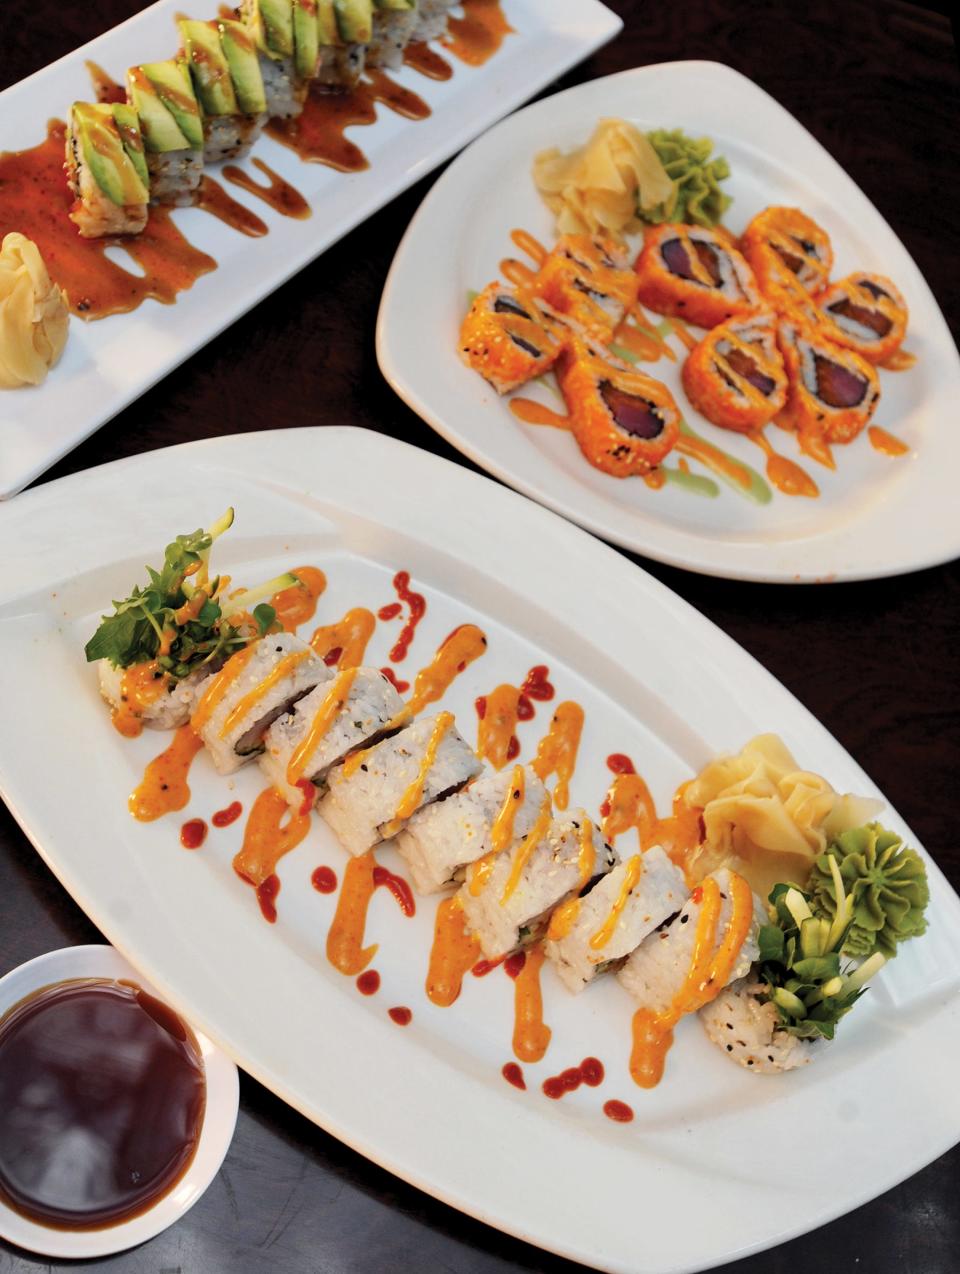 Basil Asian Bistro is one of the participating restaurants in Downtown Canton Restaurant Week, running Sept. 19 through 24.